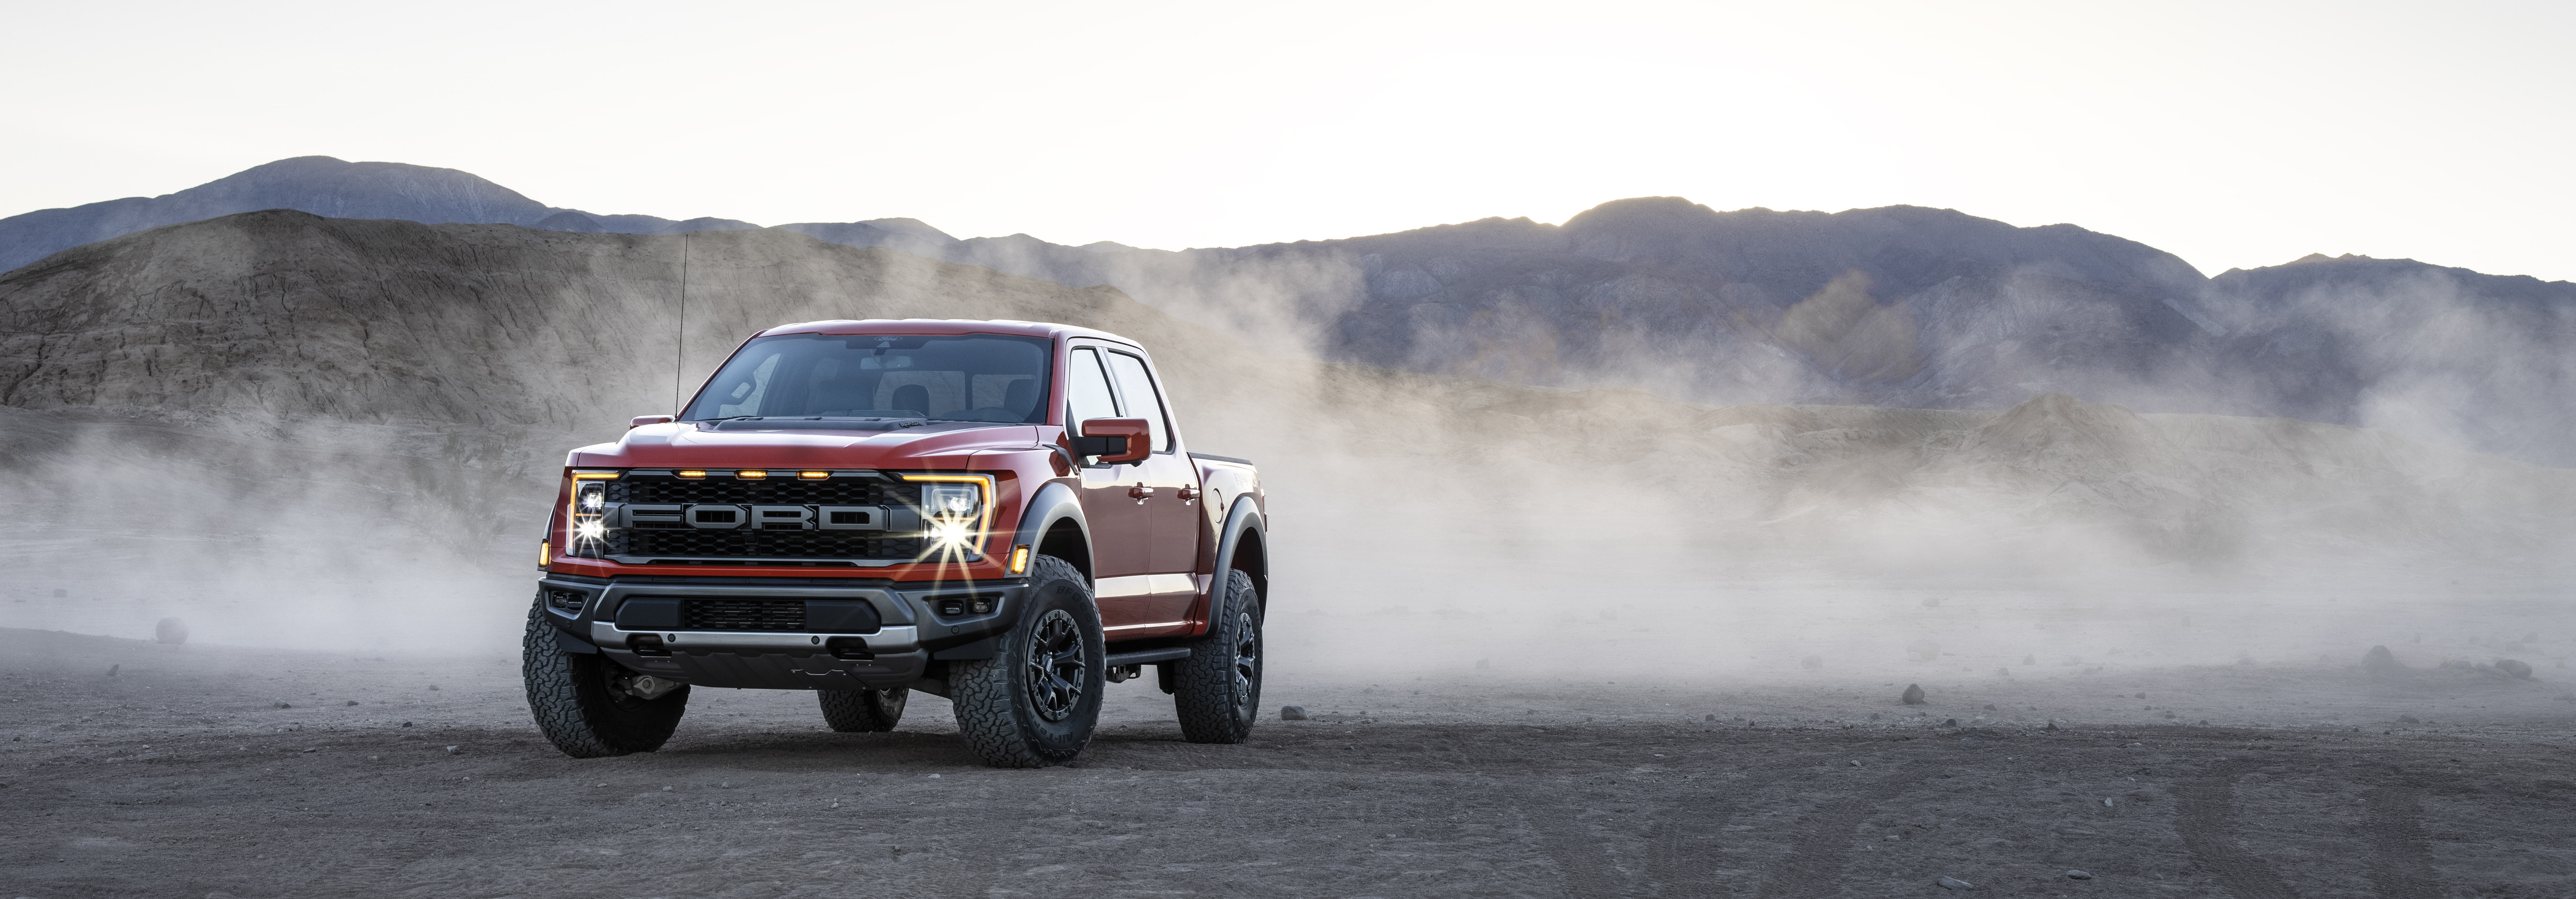 2021 Ford F150 Raptor Red POSTER 24 X 36 INCH